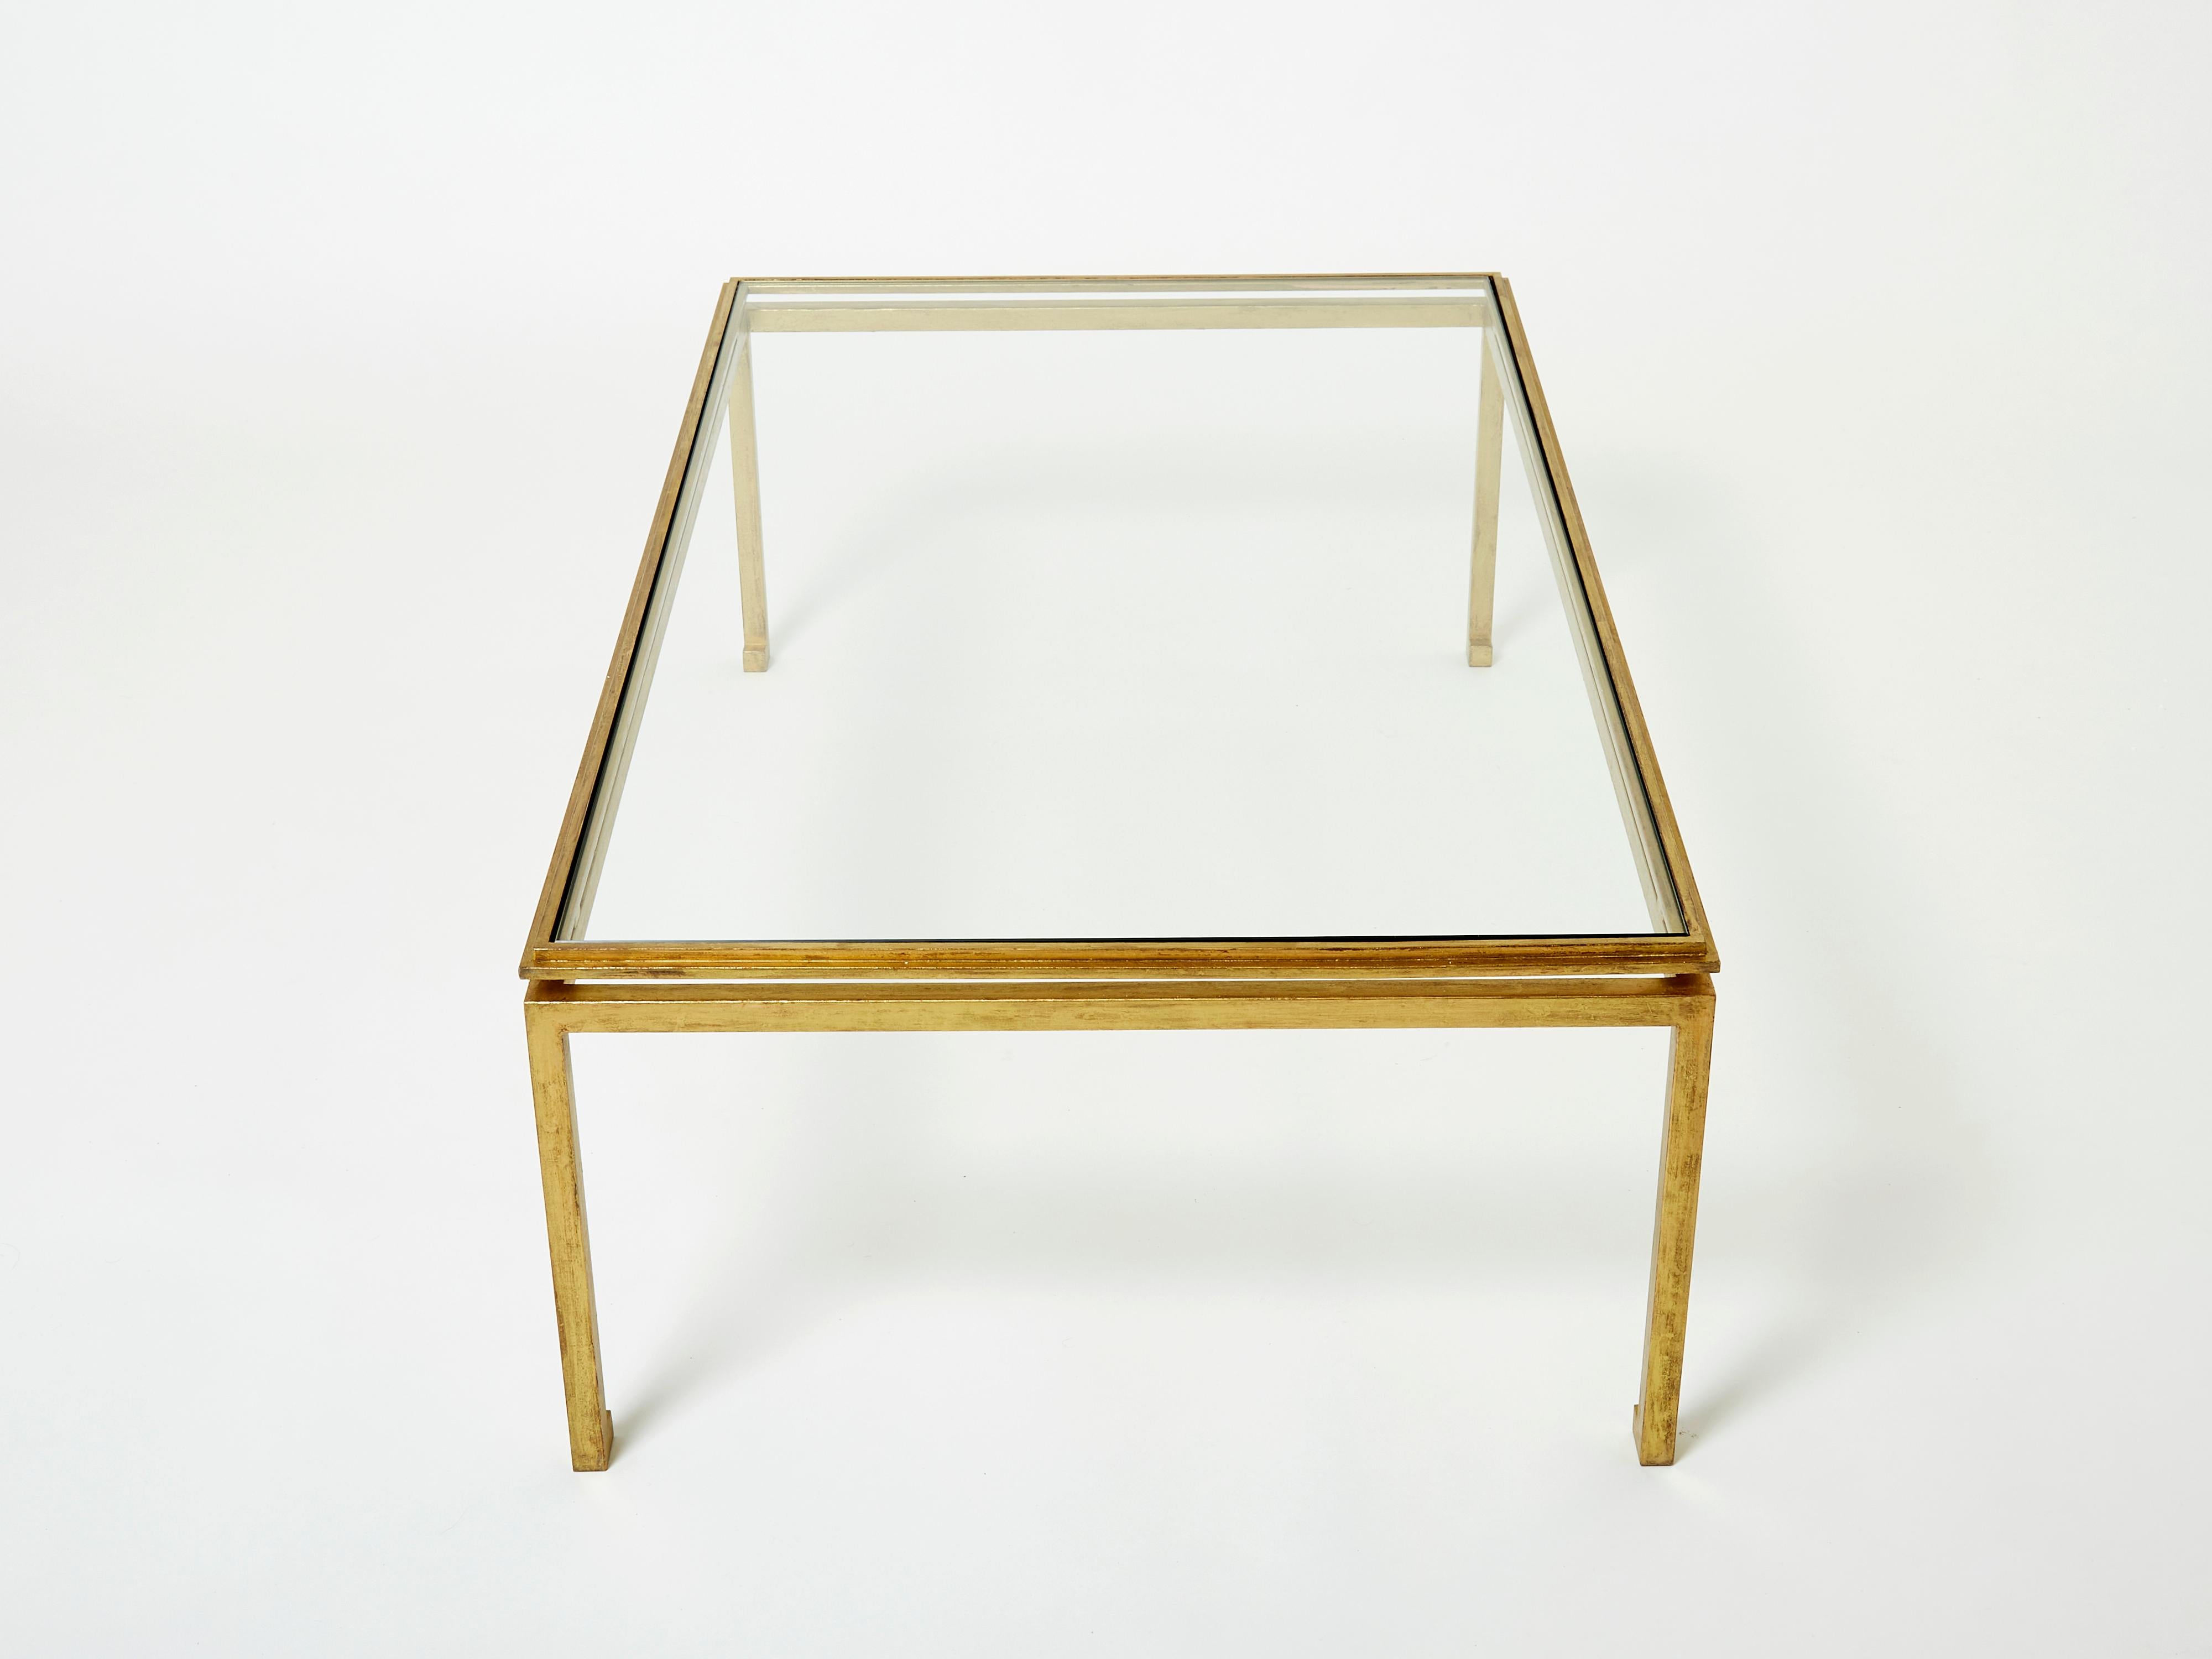 Maison Ramsay Coffee Table Gilded Iron Glass, 1950 For Sale 4